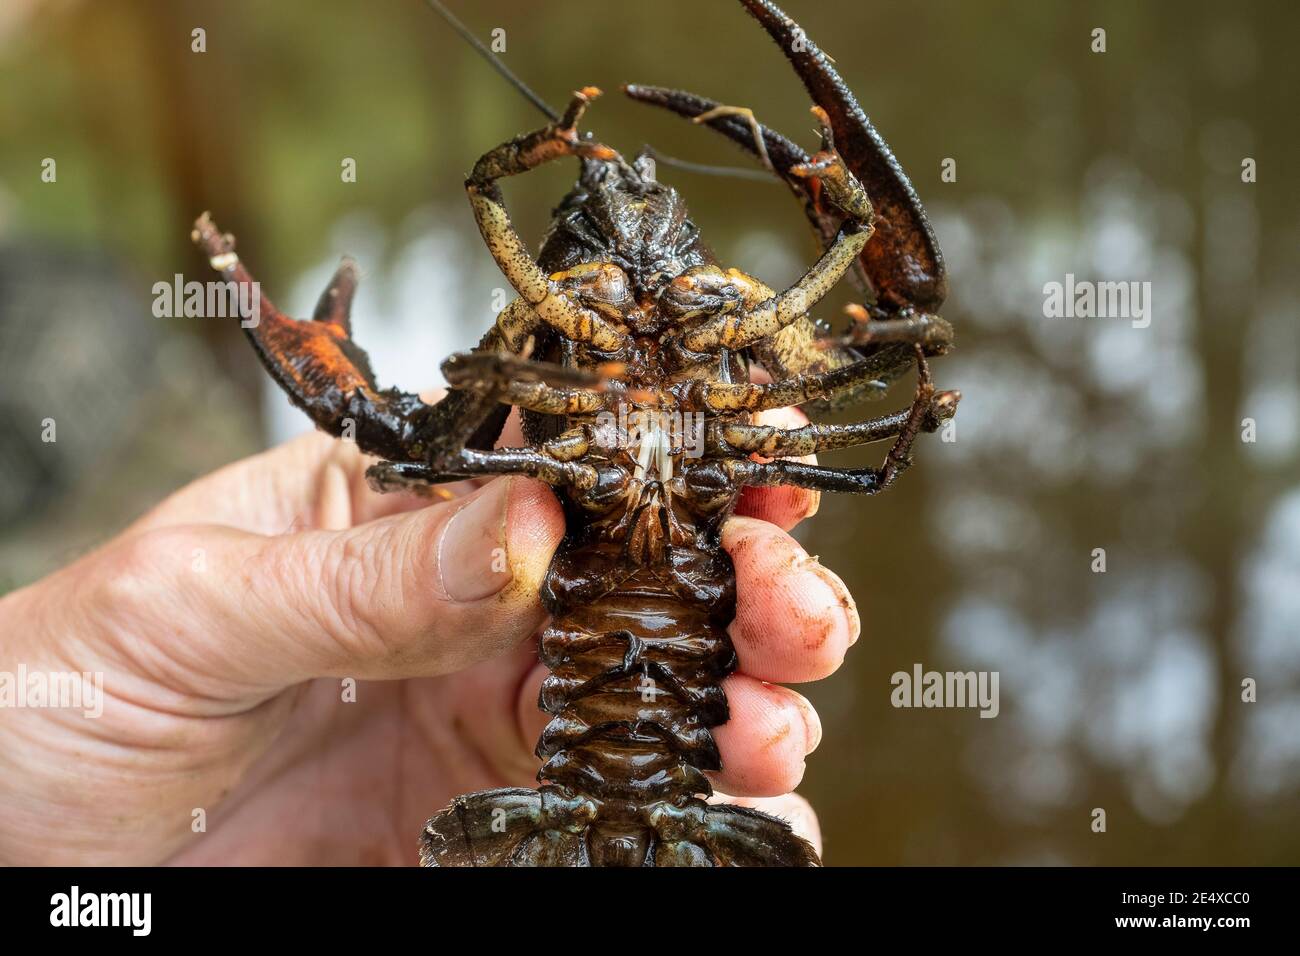 Astacus astacus, the European crayfish, noble crayfish, or broad-fingered crayfish, is the most common species of crayfish in Europe. , beatiful photo Stock Photo